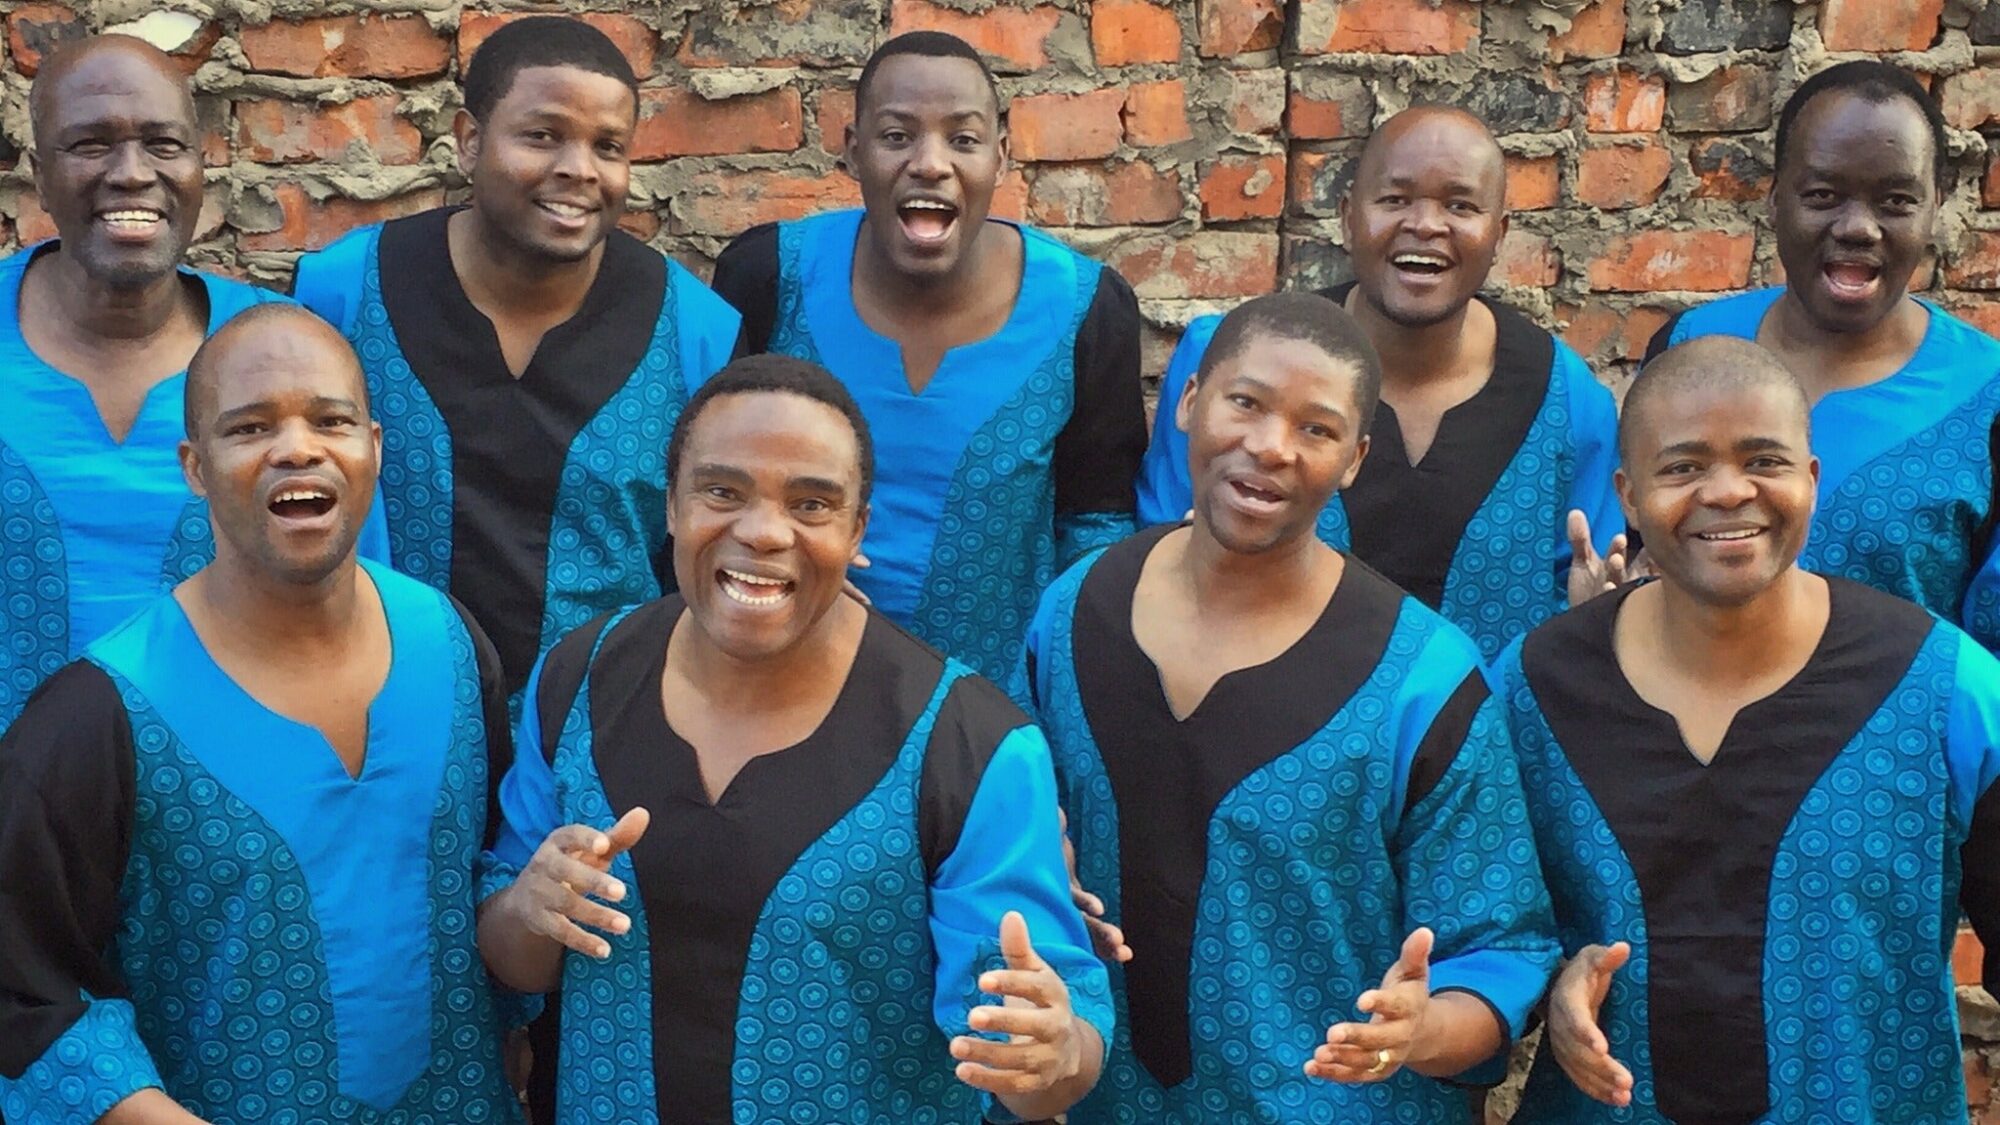 Image name Ladysmith Black Mambazo at Grand Opera House York York the 27 image from the post Events in Yorkshire.com.